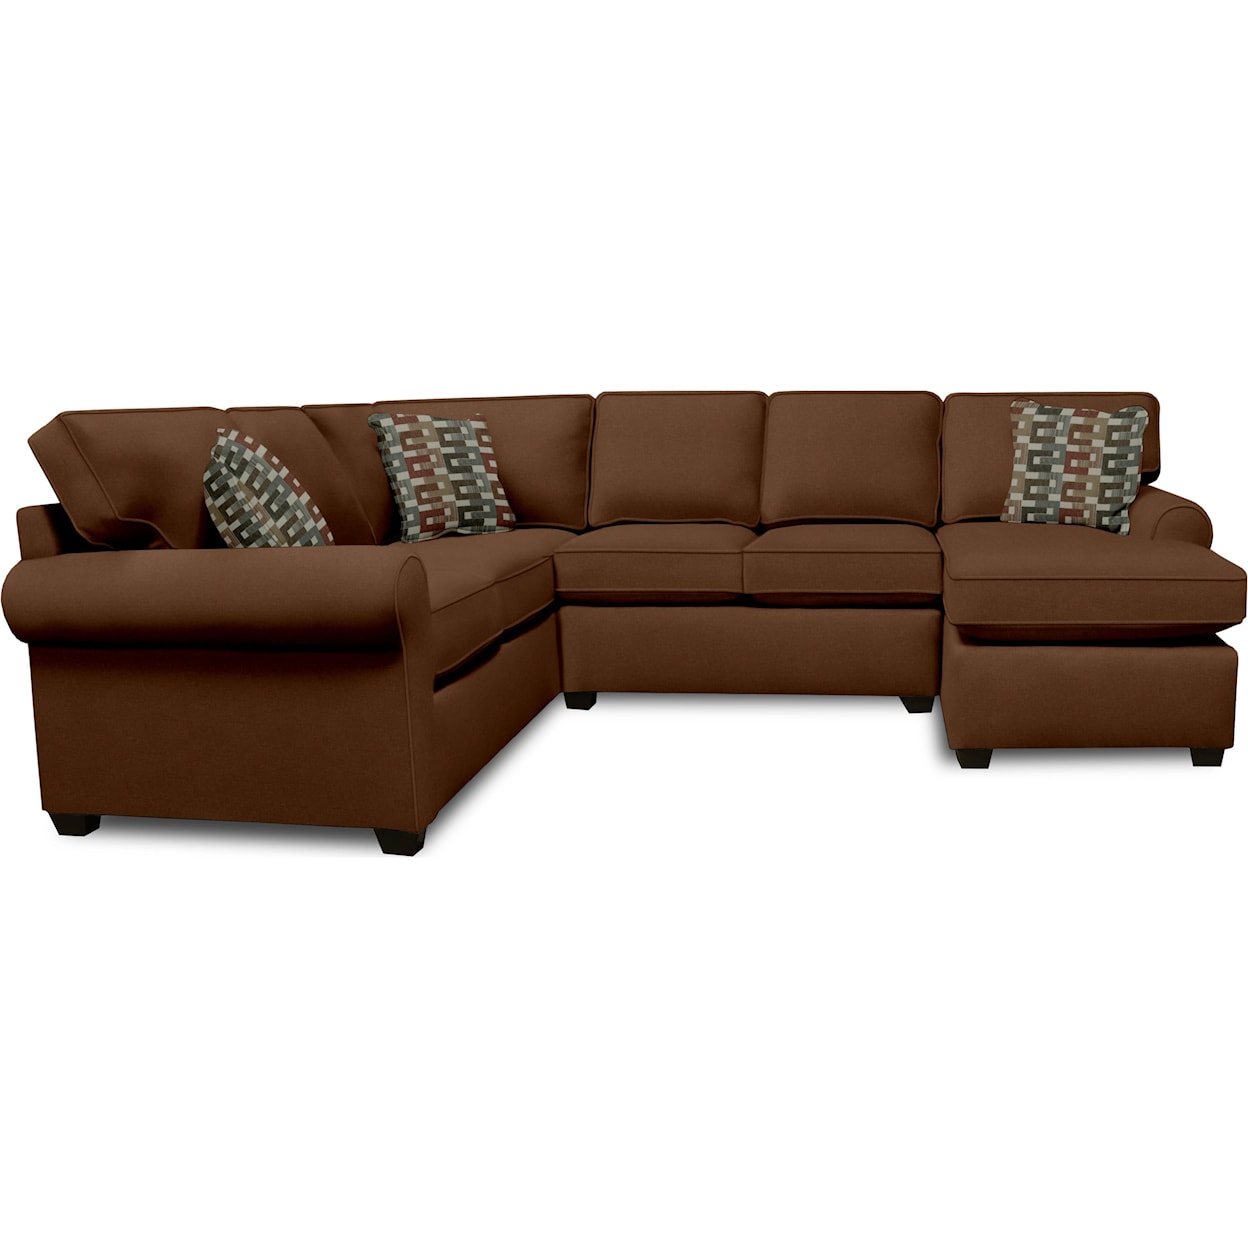 England 2630 Series Sectional